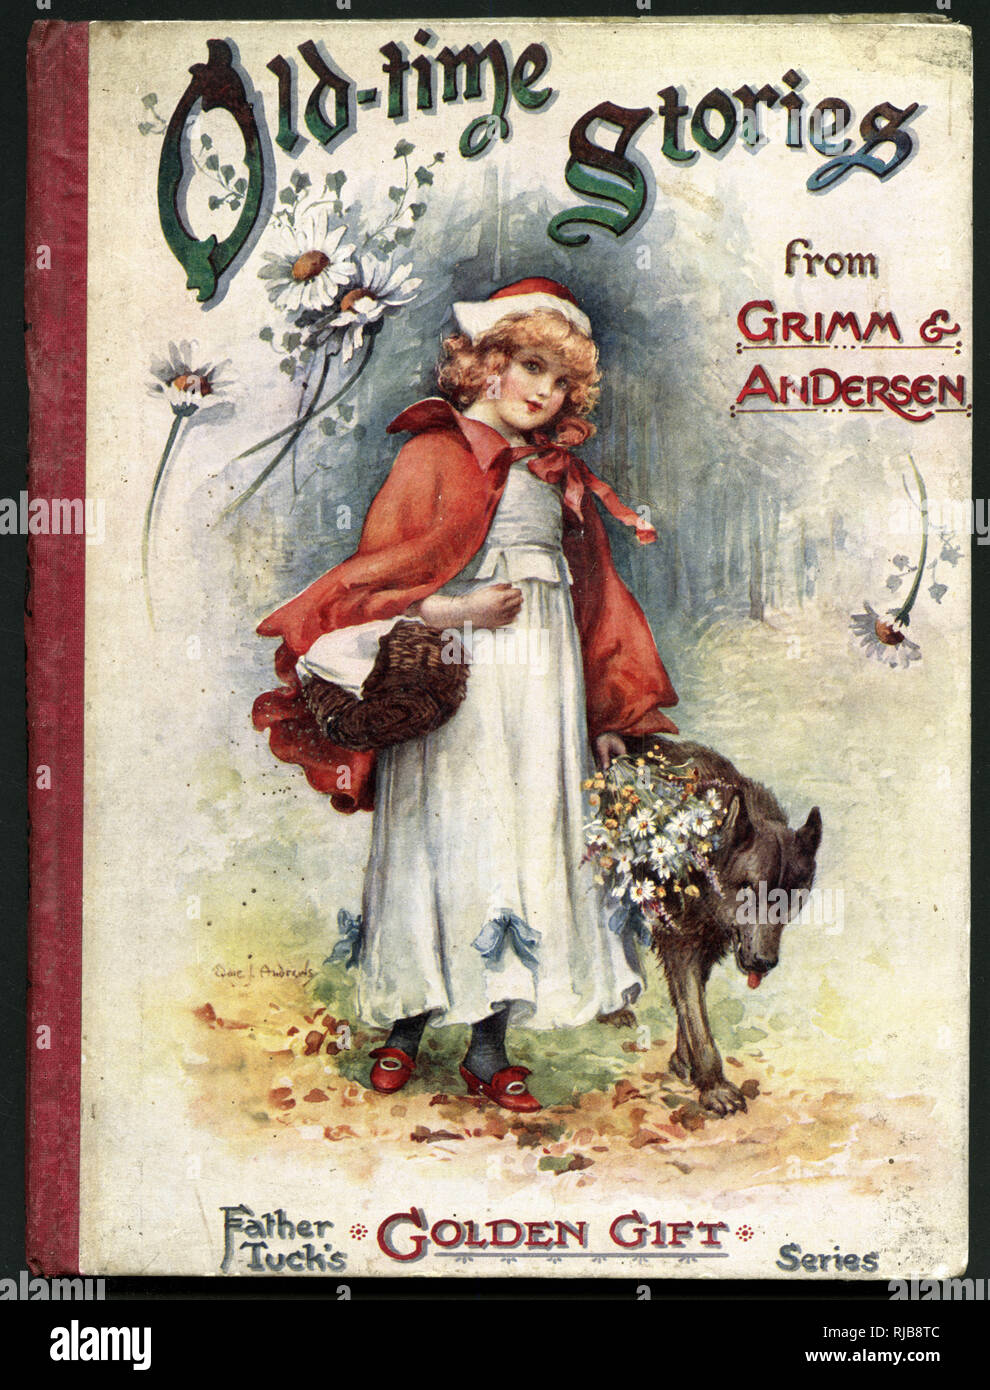 Front cover, Old-time stories from Grimm & Andersen Stock Photo